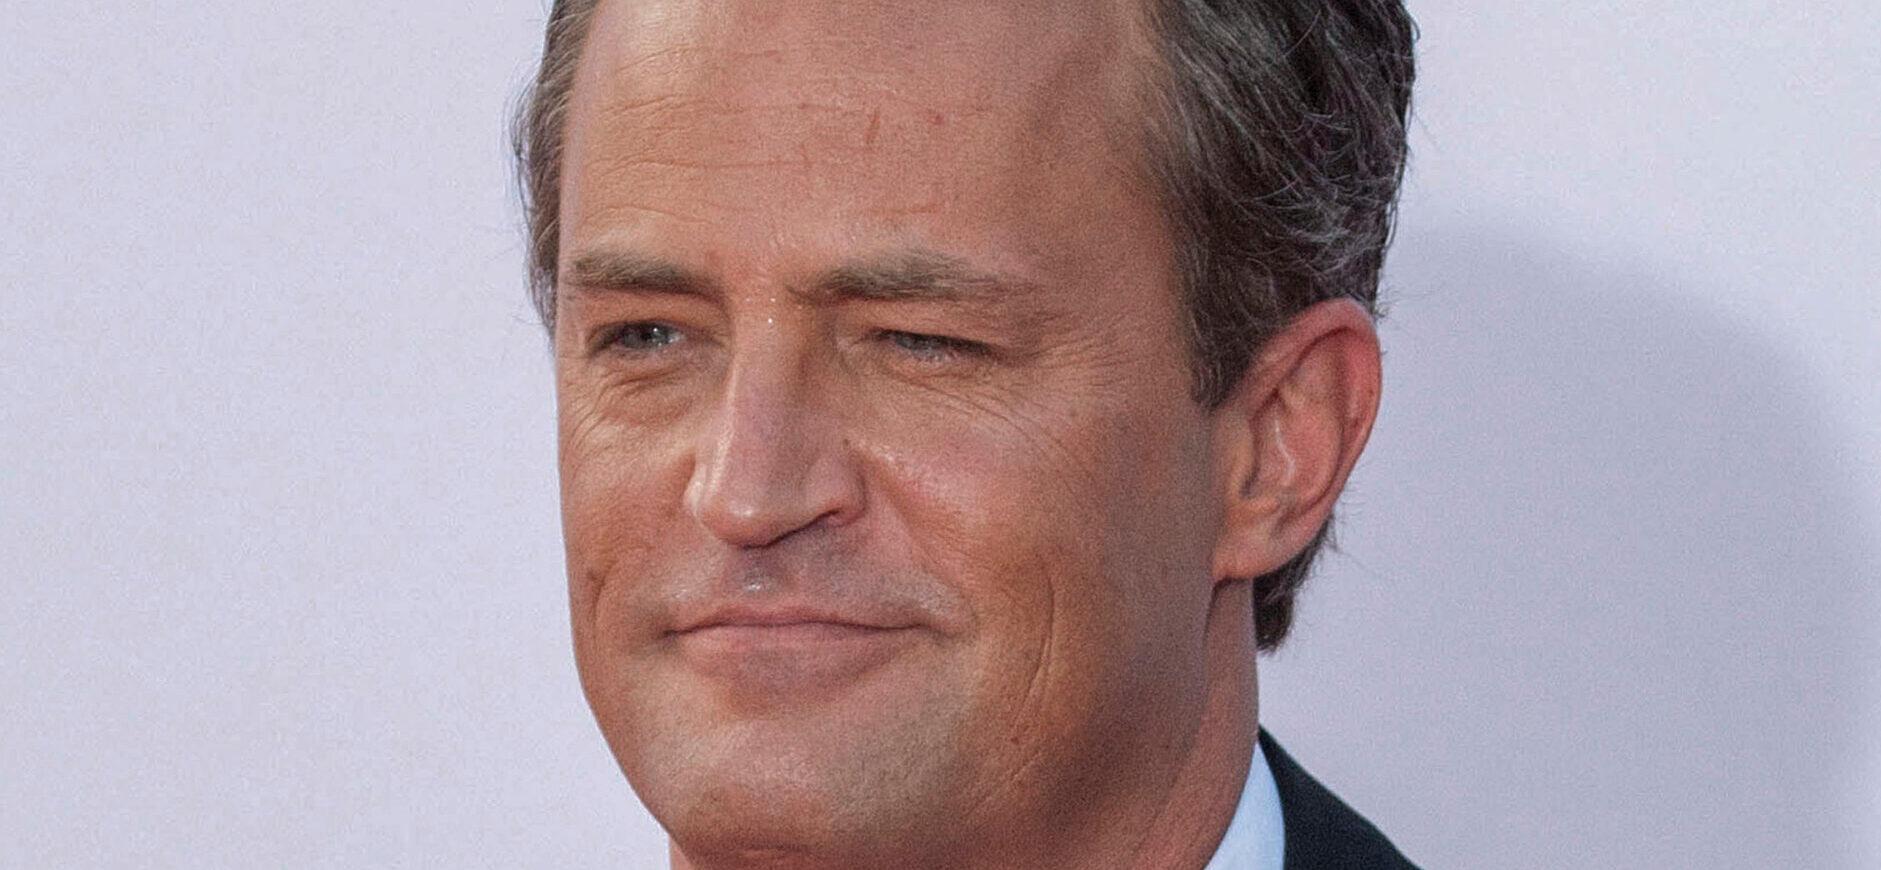 Ketamine Expert Claims Matthew Perry ‘Did Himself In’ Prior To Death